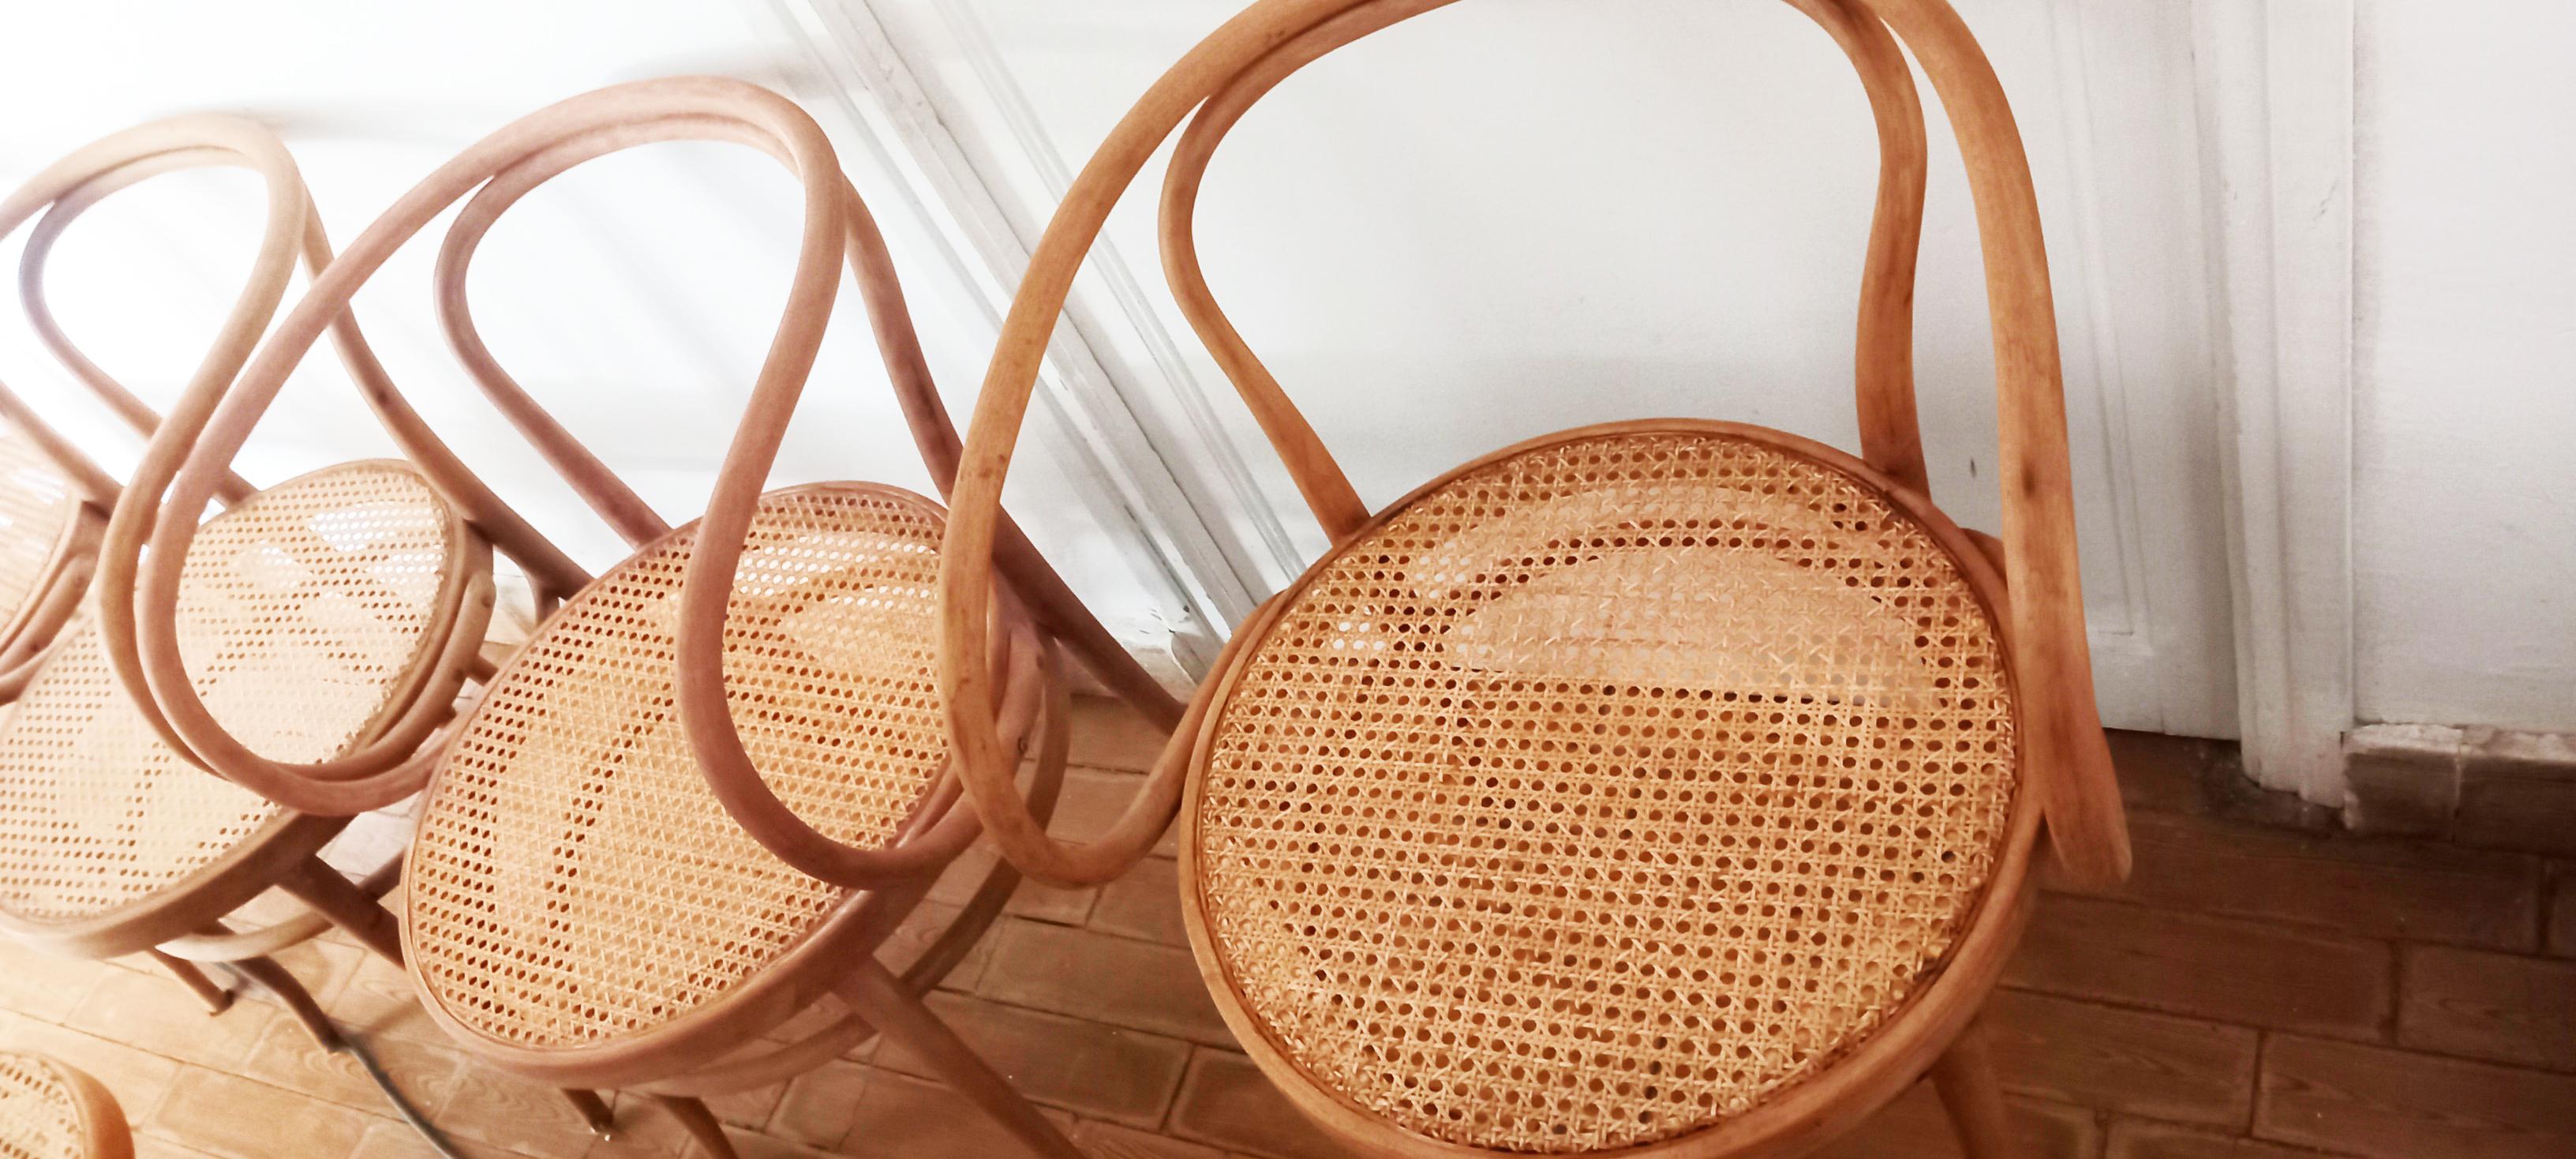 Six Midcentury Cane Bentwood Chair After Thonet 209, 1950s In Good Condition For Sale In Mombuey, Zamora